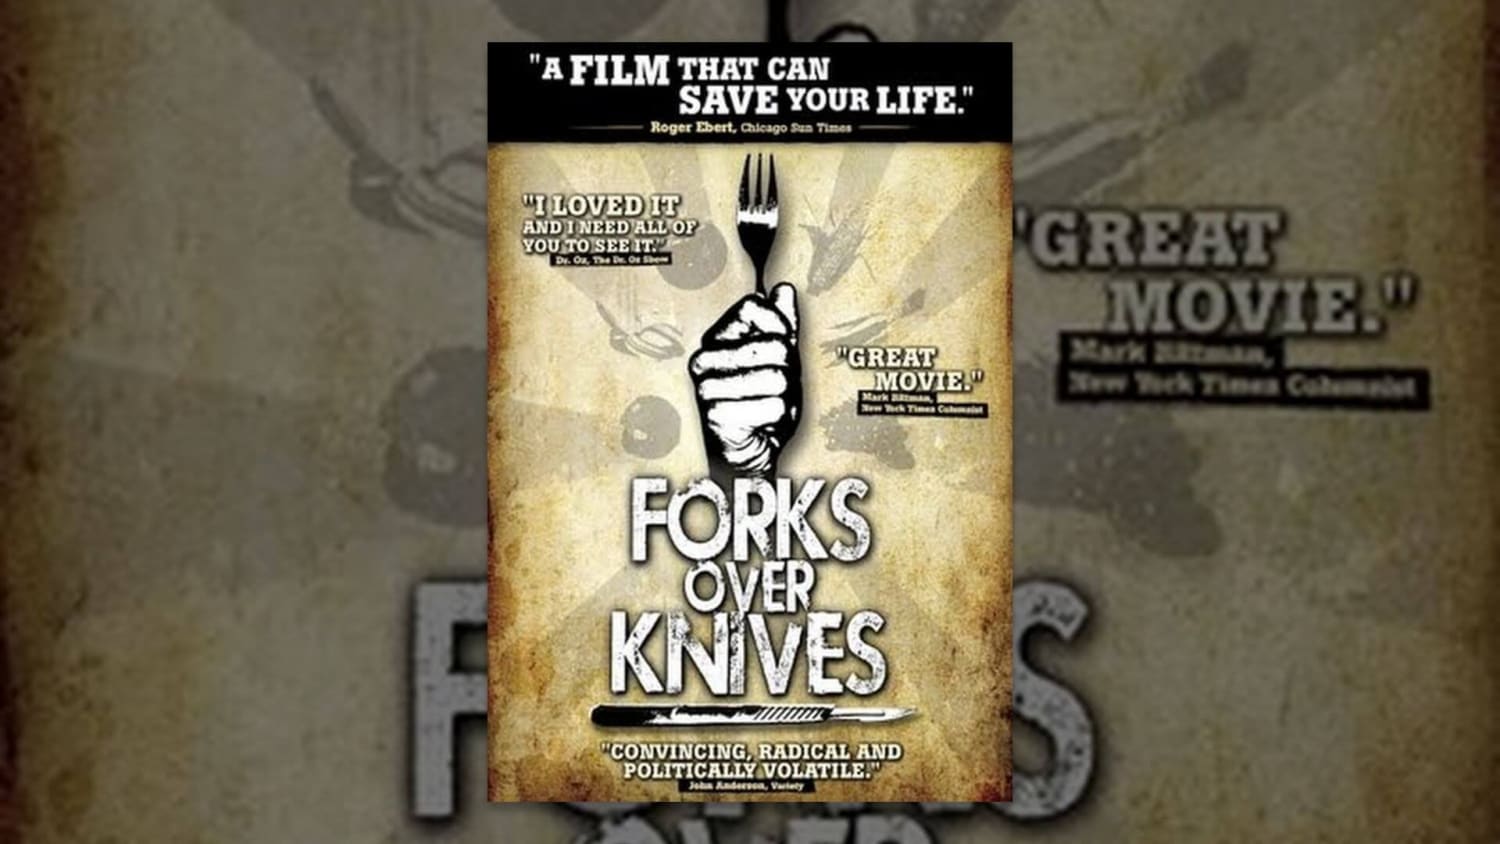 Forks Over Knives Documentary - watch it free